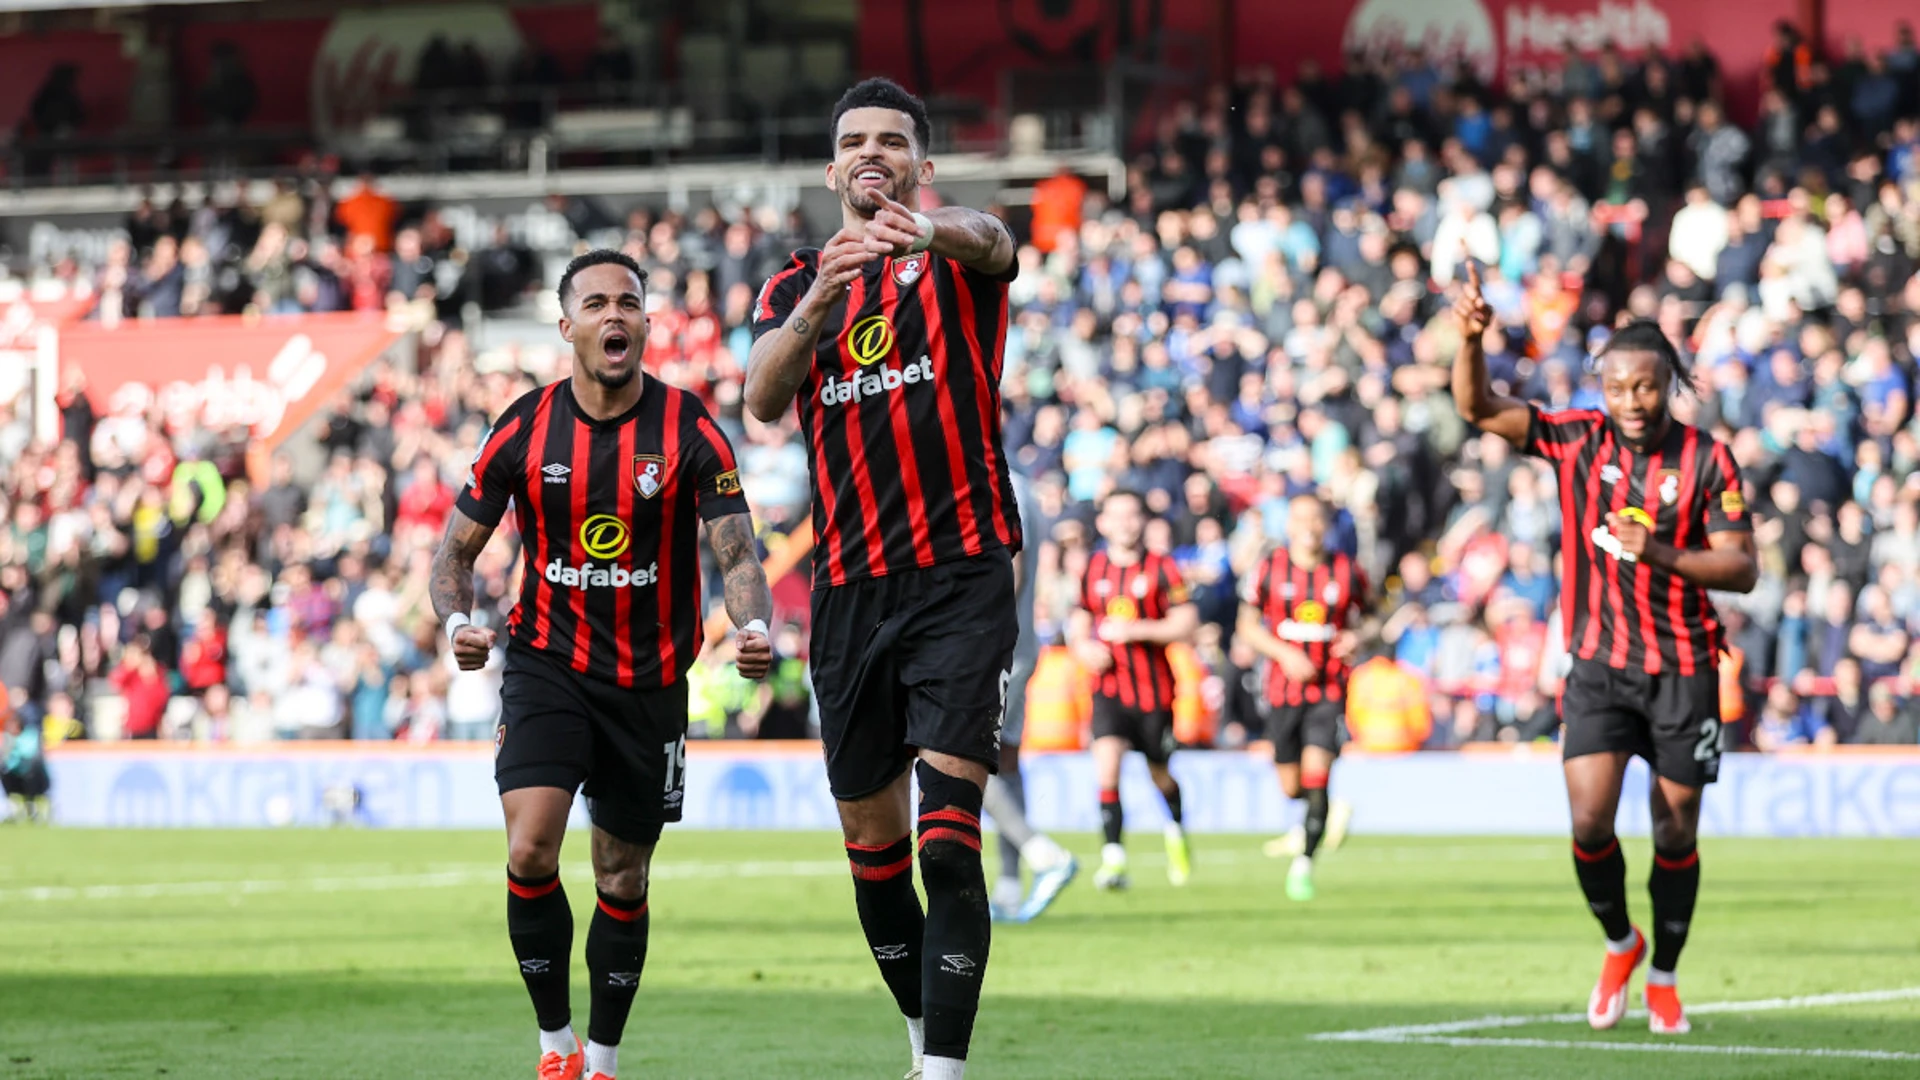 Coleman own goal condemns Everton to defeat at Bournemouth